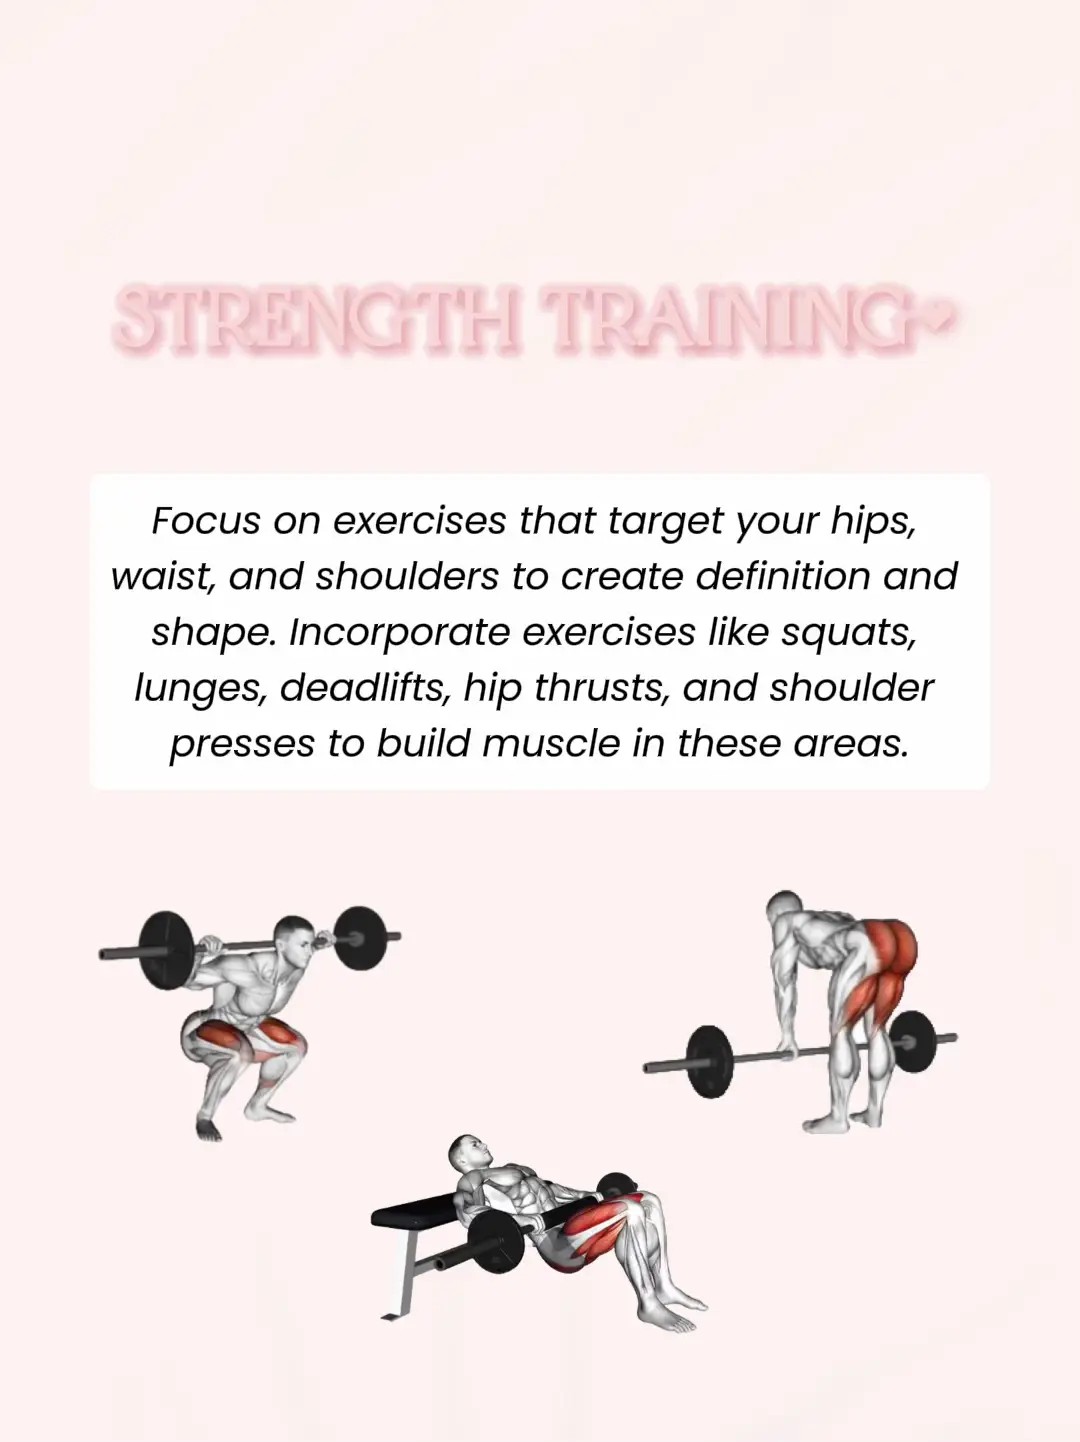 I am an inverted triangle - broad back,shoulders and waist with relatively  small thighs which makes me feel self-conscious. Is it still worth me doing  upper body resistance workouts. I am also